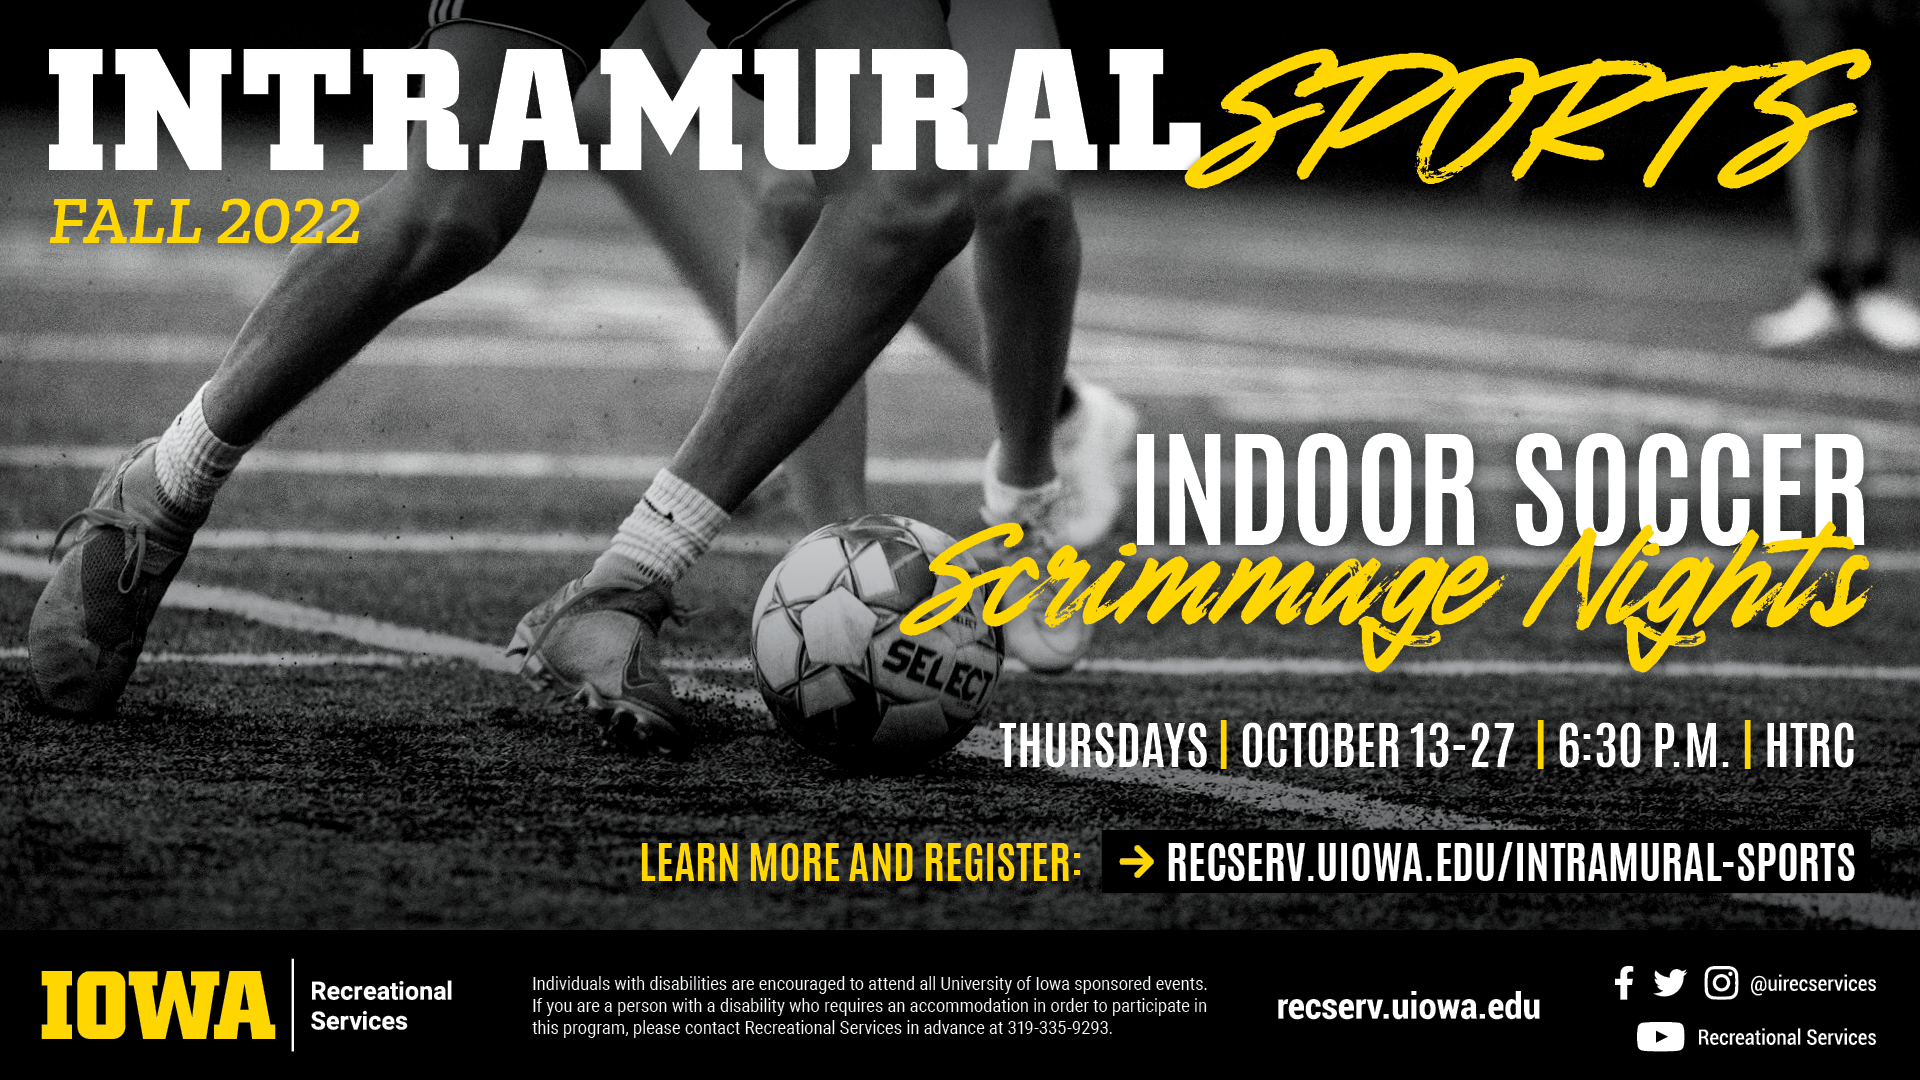 Intramural Sports Fall 2022. Indoor Soccer Scrimmage Nights on Thursdays October 13-27 at 6:30. Learn more and register